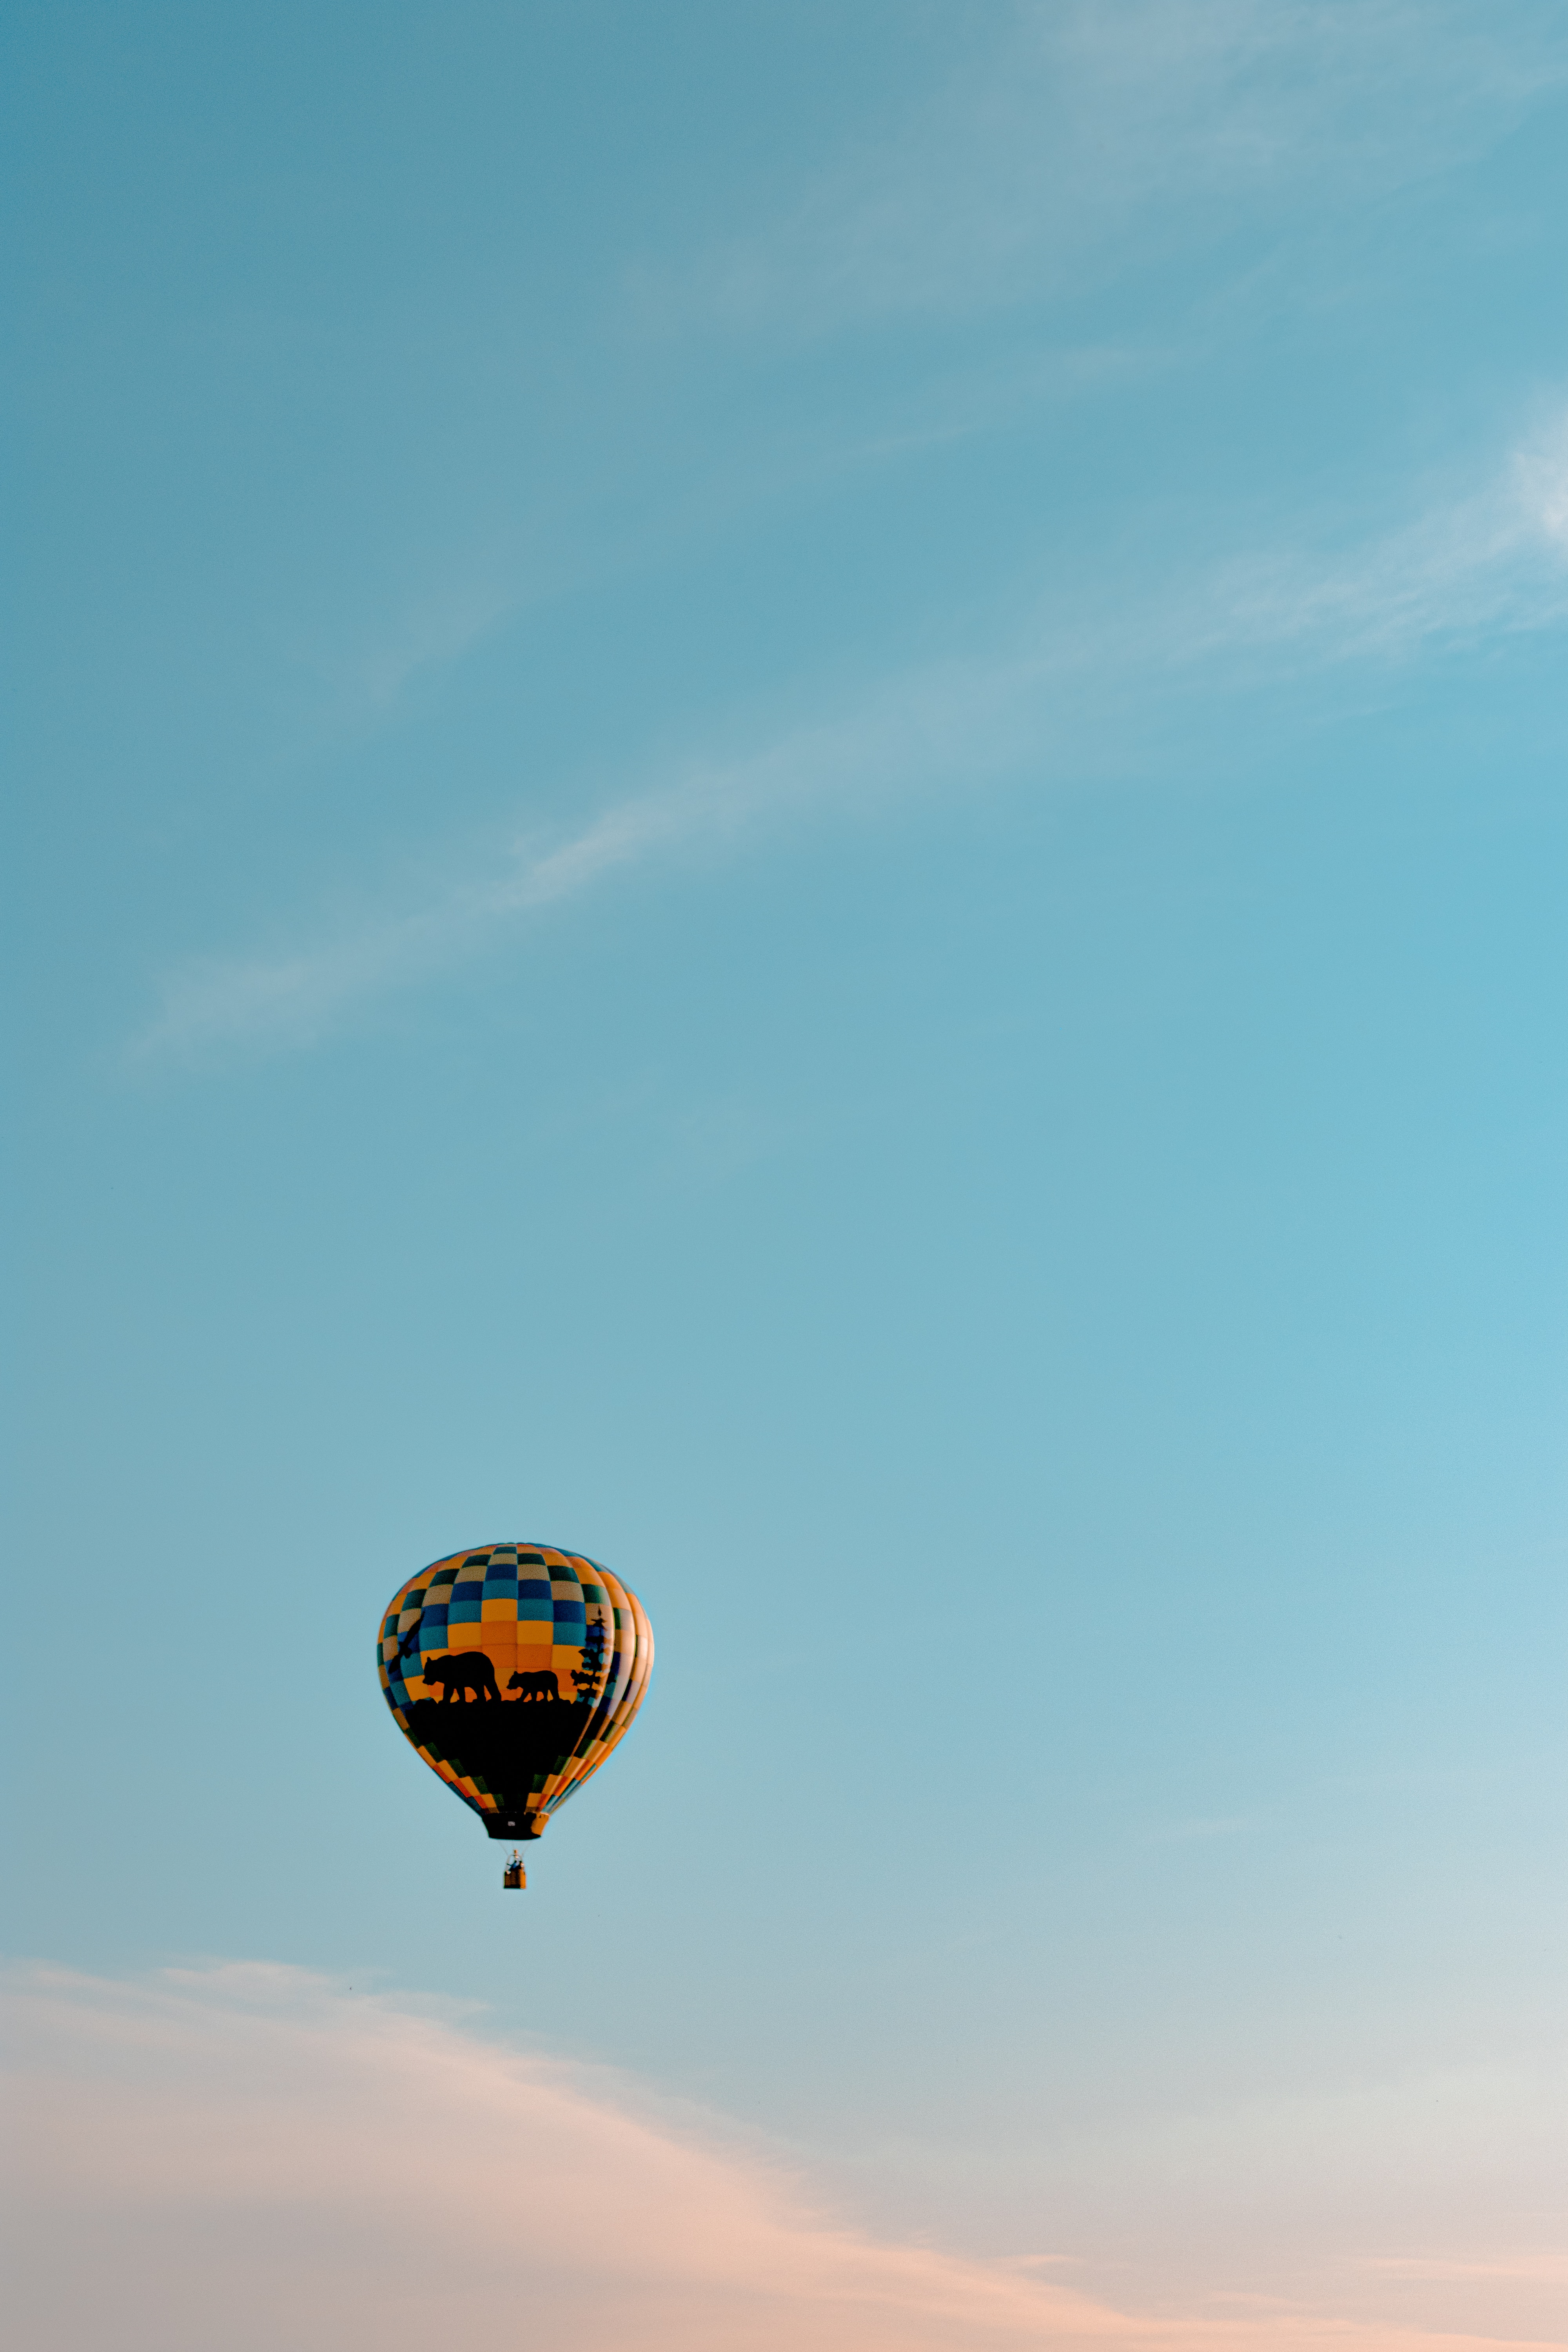 android miscellaneous, clouds, to fly, height, fly, sky, balloon, miscellanea